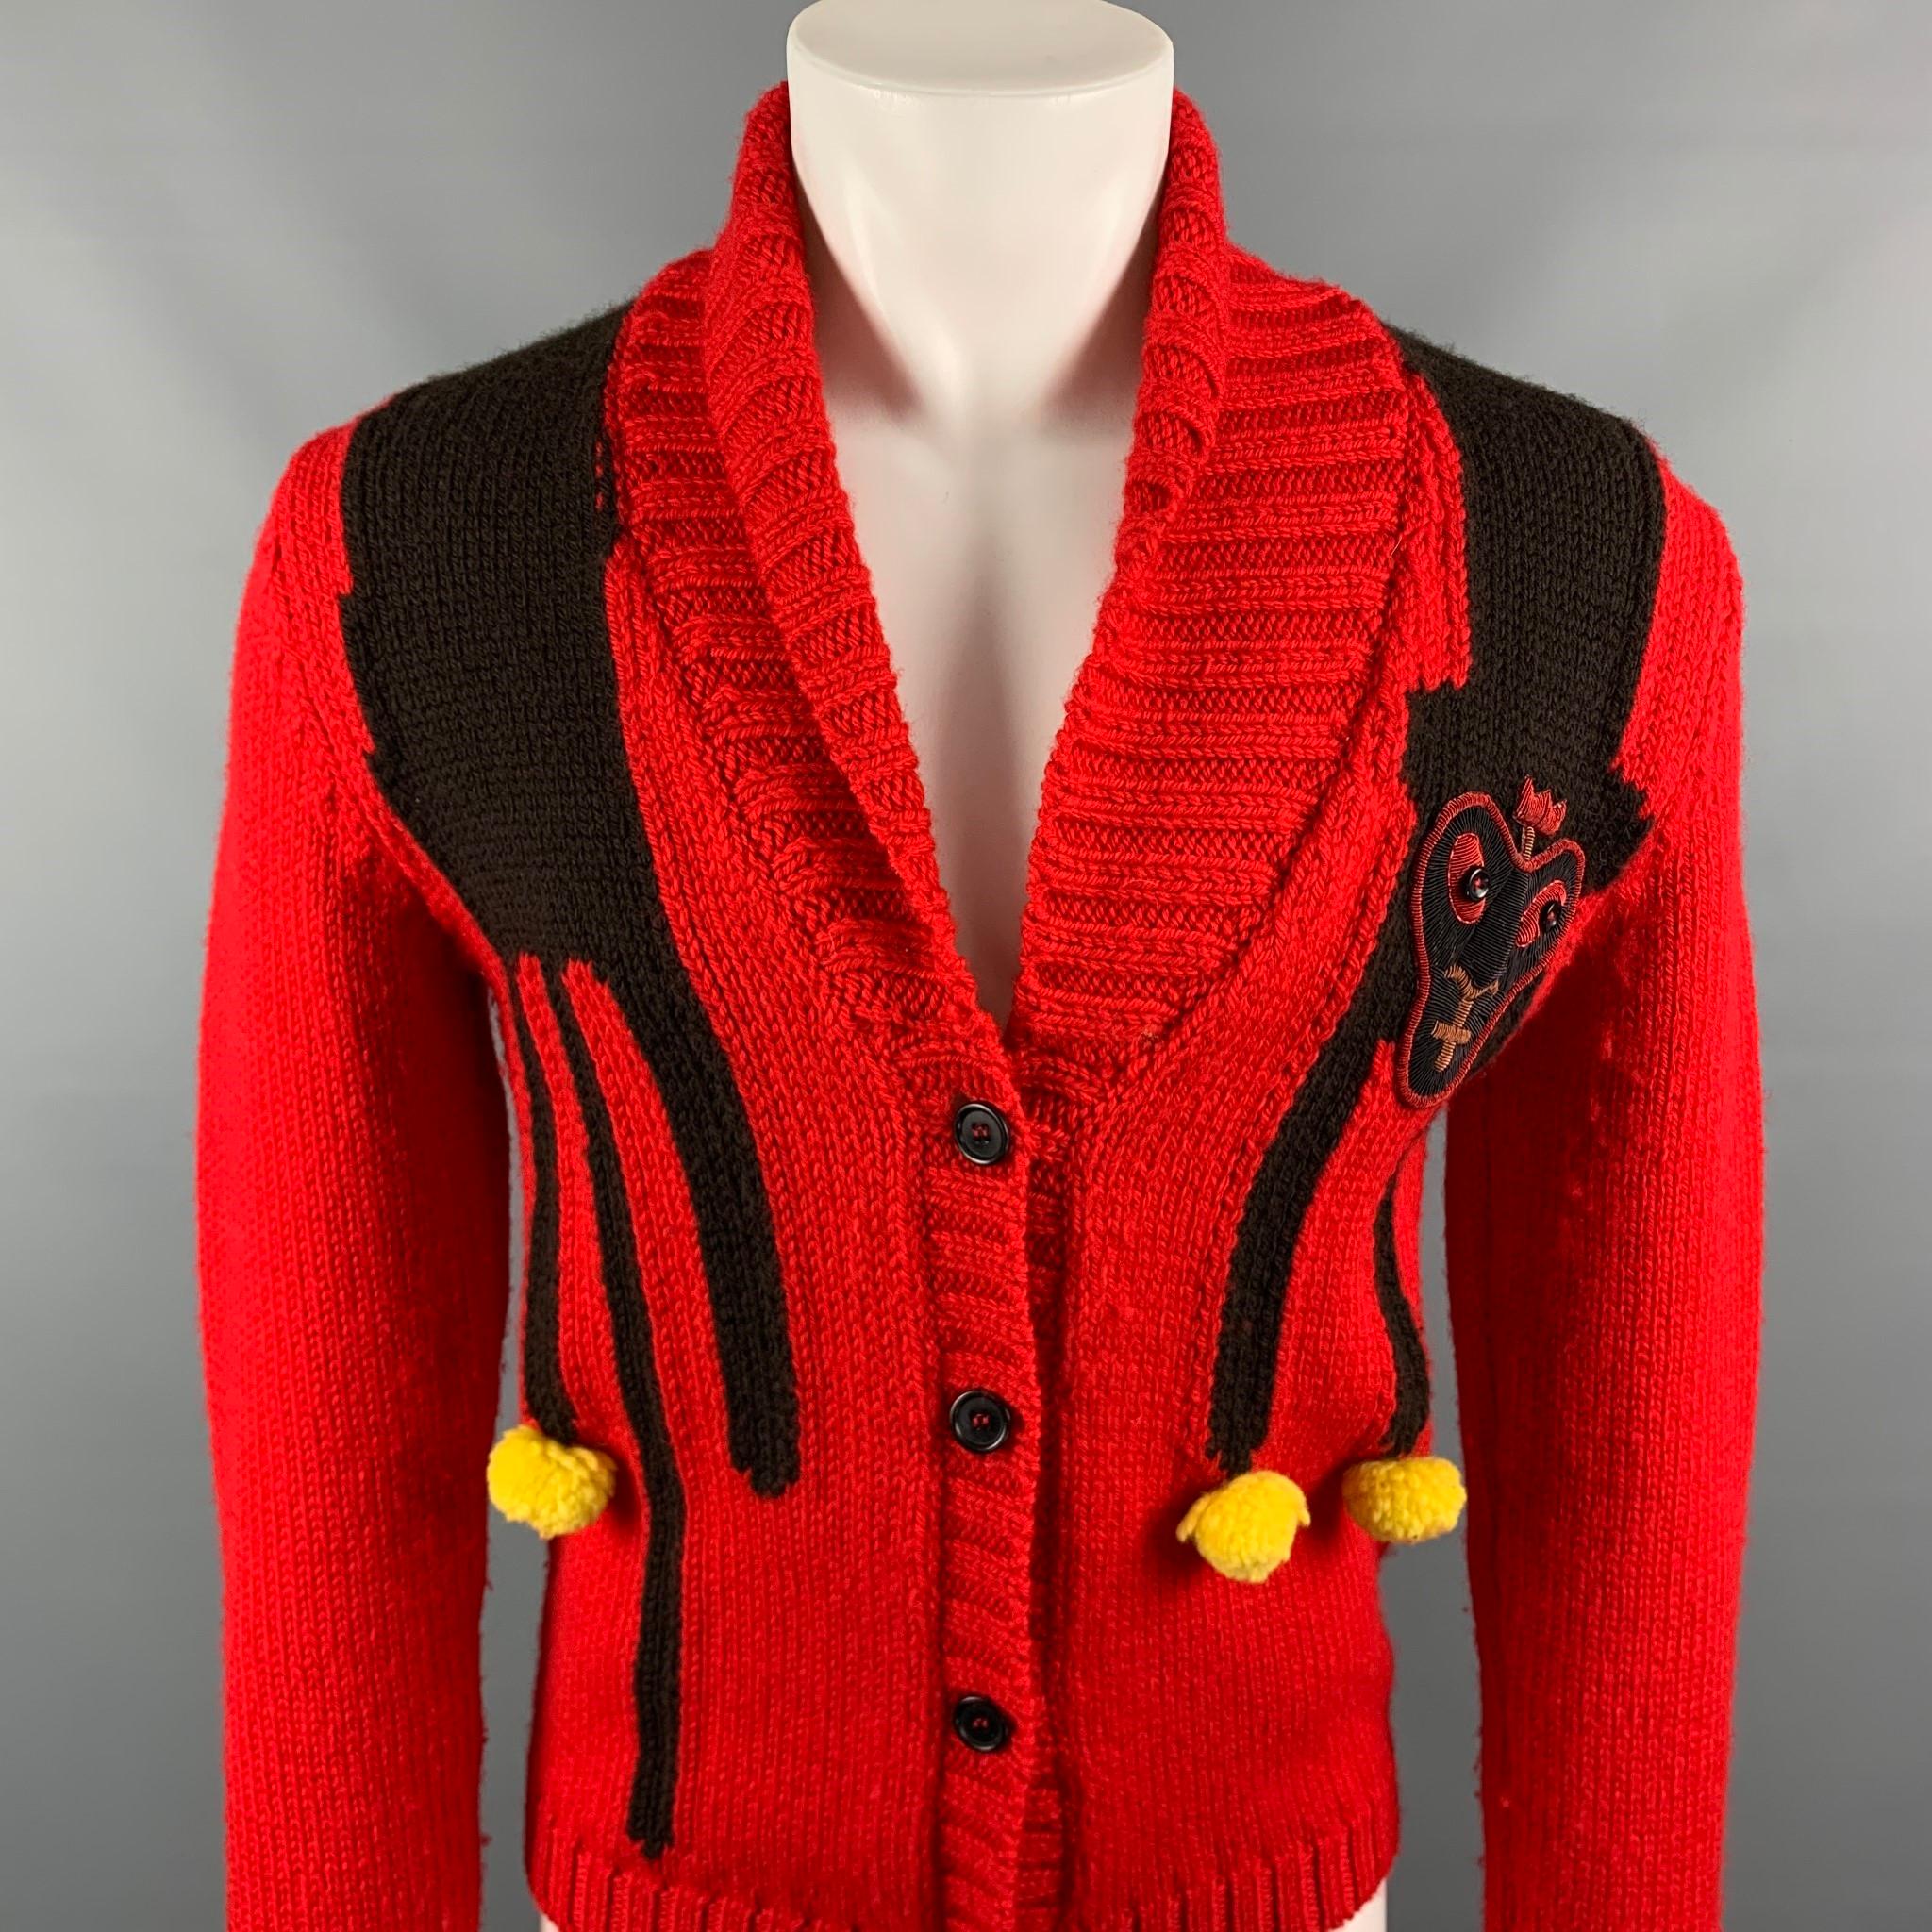 WALTER VAN BEIRENDONCK cardigan comes in a red & yellow knitted wool with a face patch design featuring a shawl collar and a buttoned closure. Made in Belgium.

Very Good Pre-Owned Condition.
Marked: S

Measurements:

Shoulder: 17.5  in.
Chest: 38